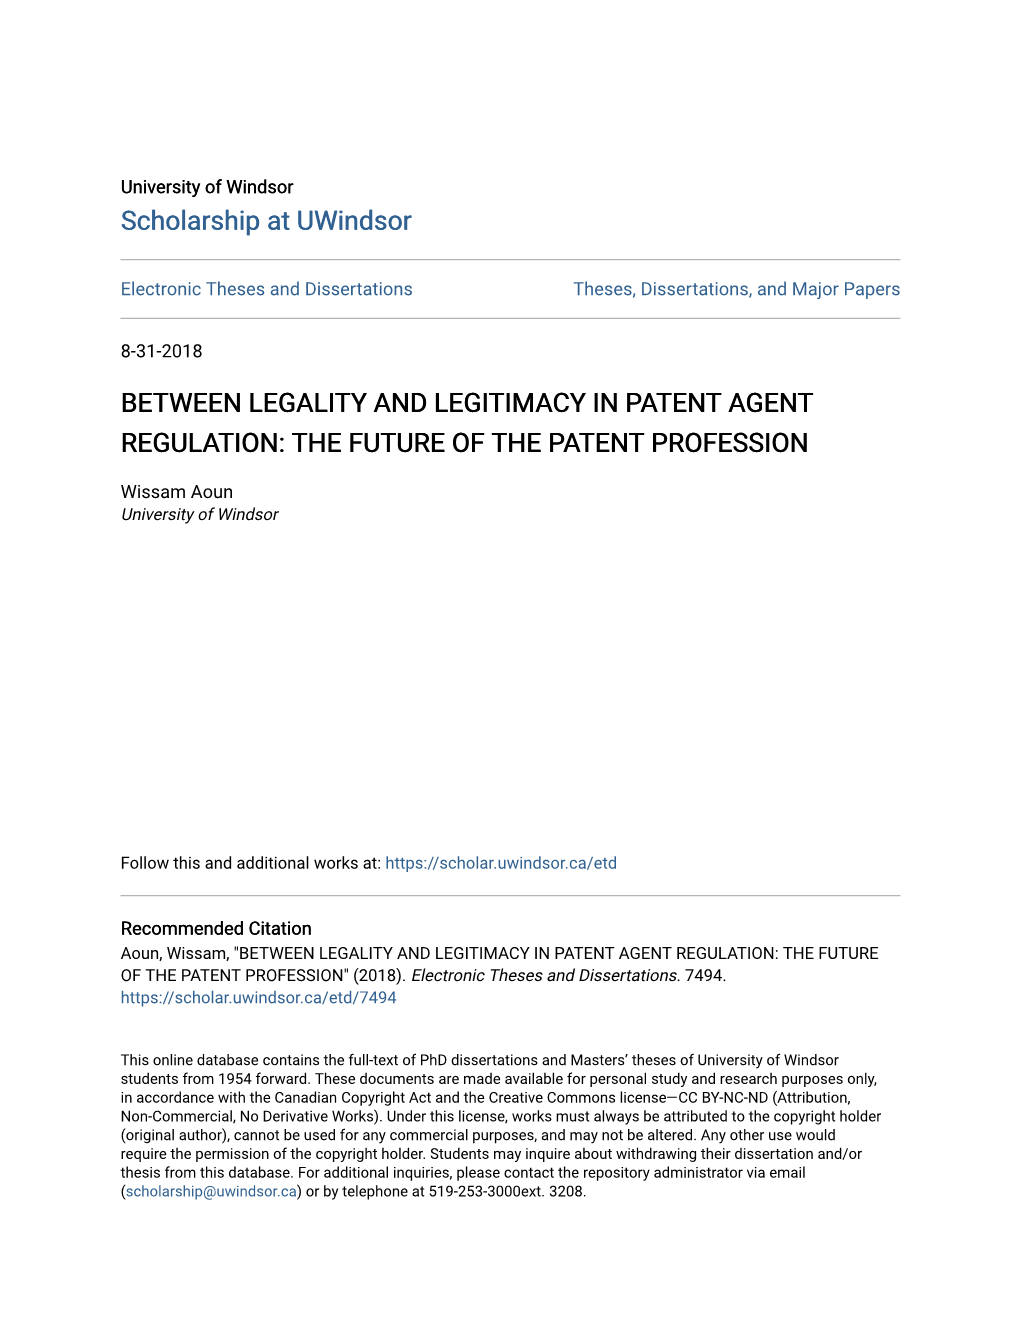 Between Legality and Legitimacy in Patent Agent Regulation: the Future of the Patent Profession